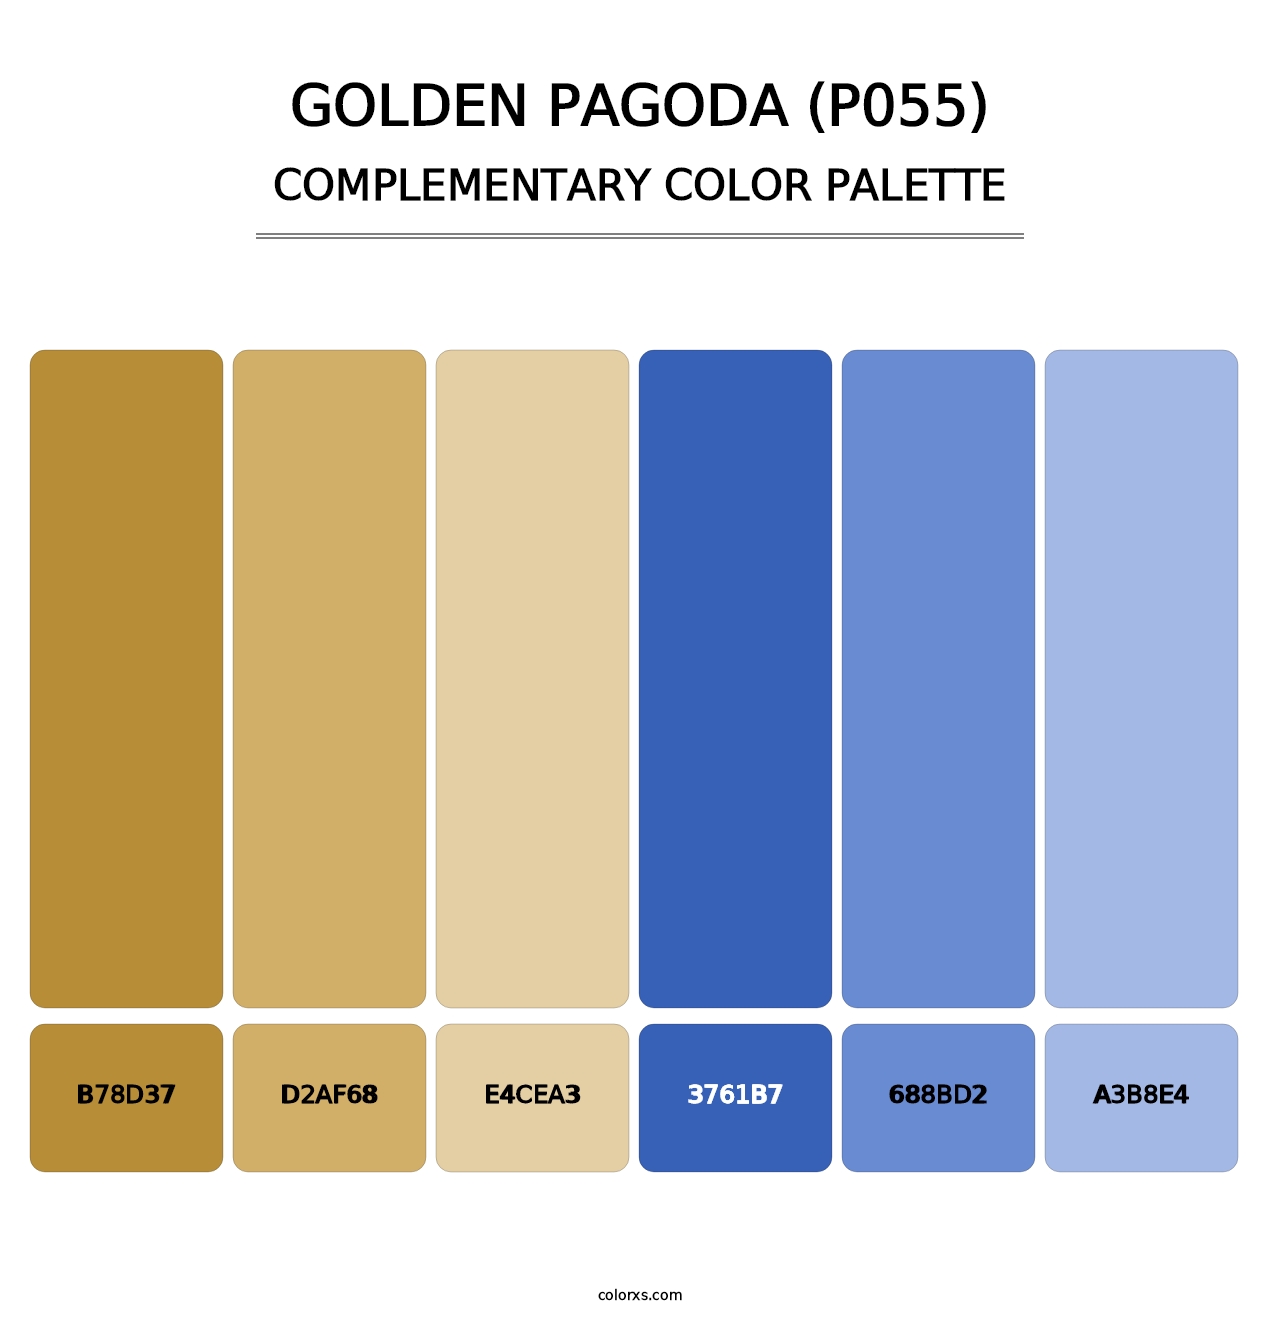 Golden Pagoda (P055) - Complementary Color Palette